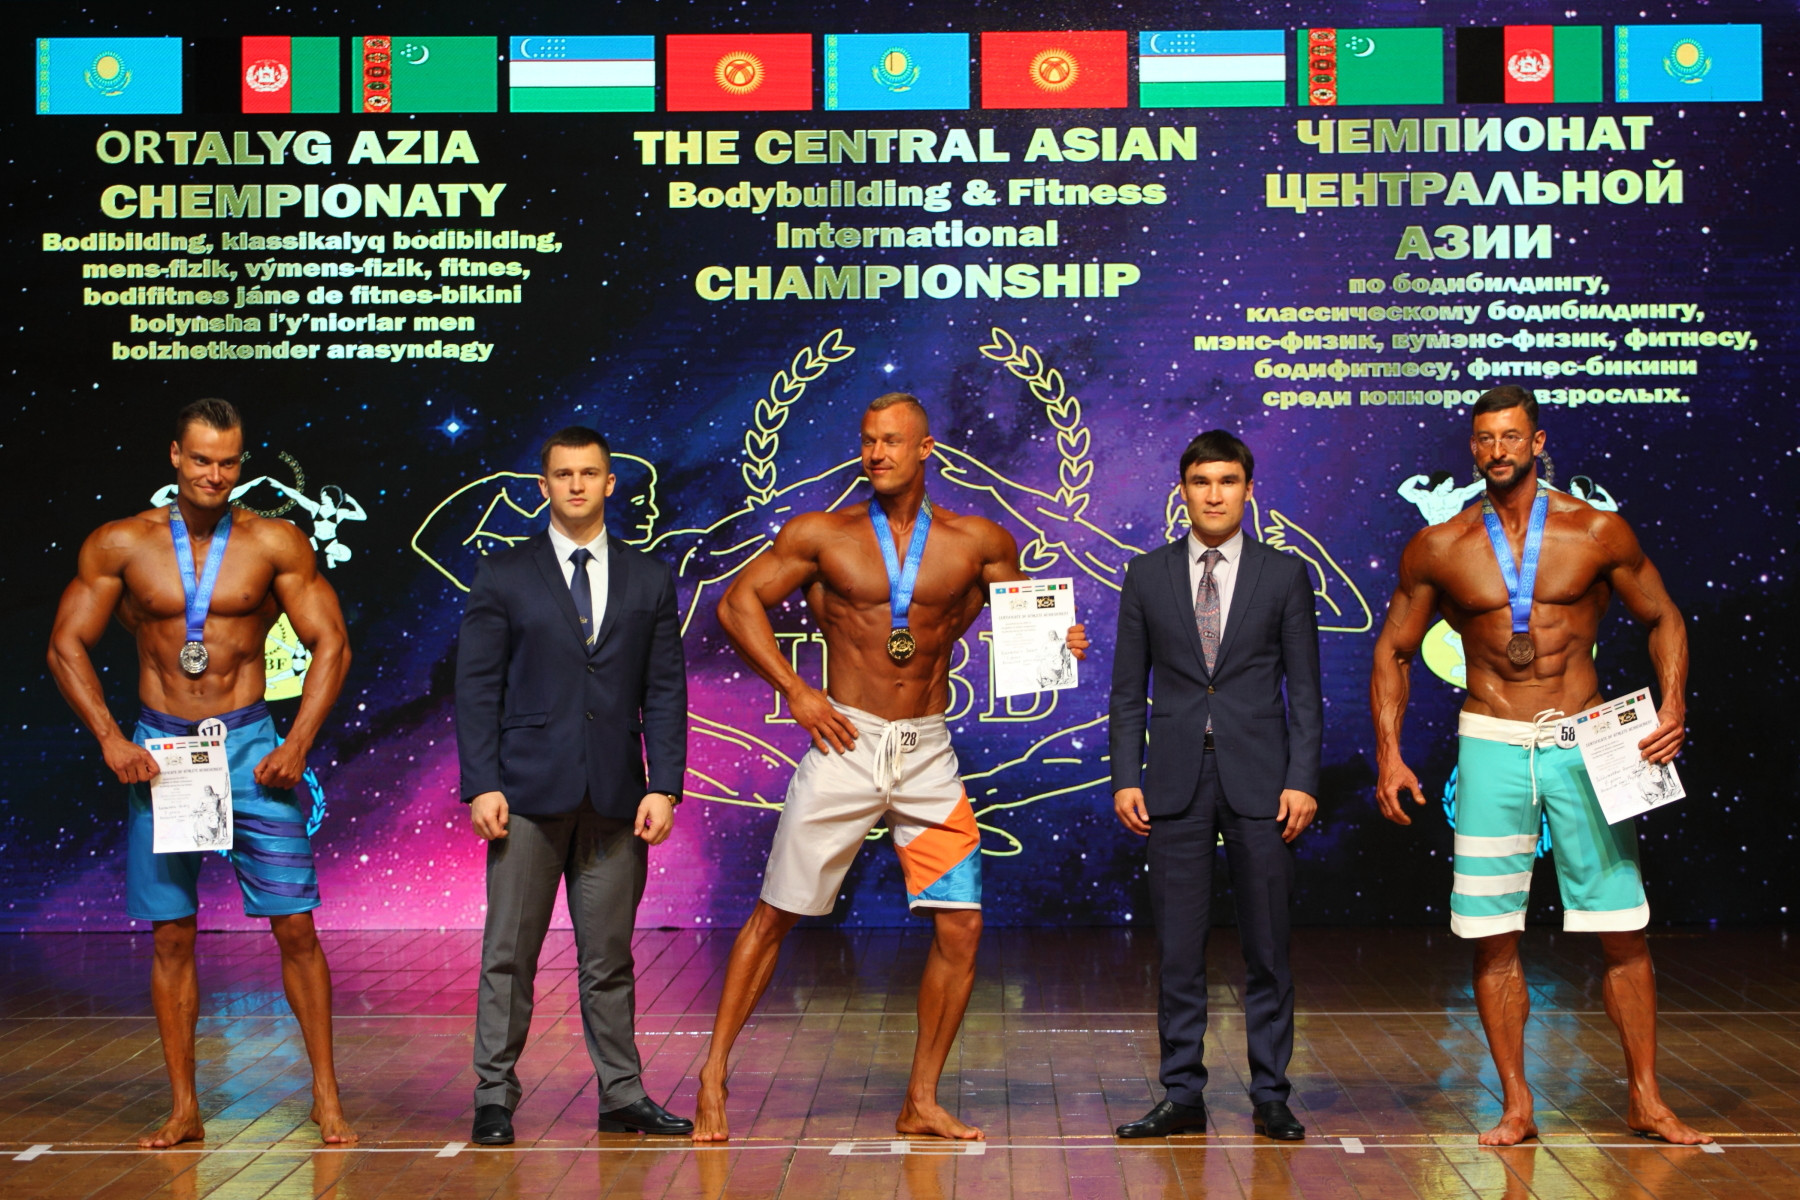 News that the Kazakhstan Bodybuilding & Fitness Federation had been recoginised by its National Olympic Committee came on the eve of the IFBB Central Asian Championships in Nur-Sultan ©IFBB